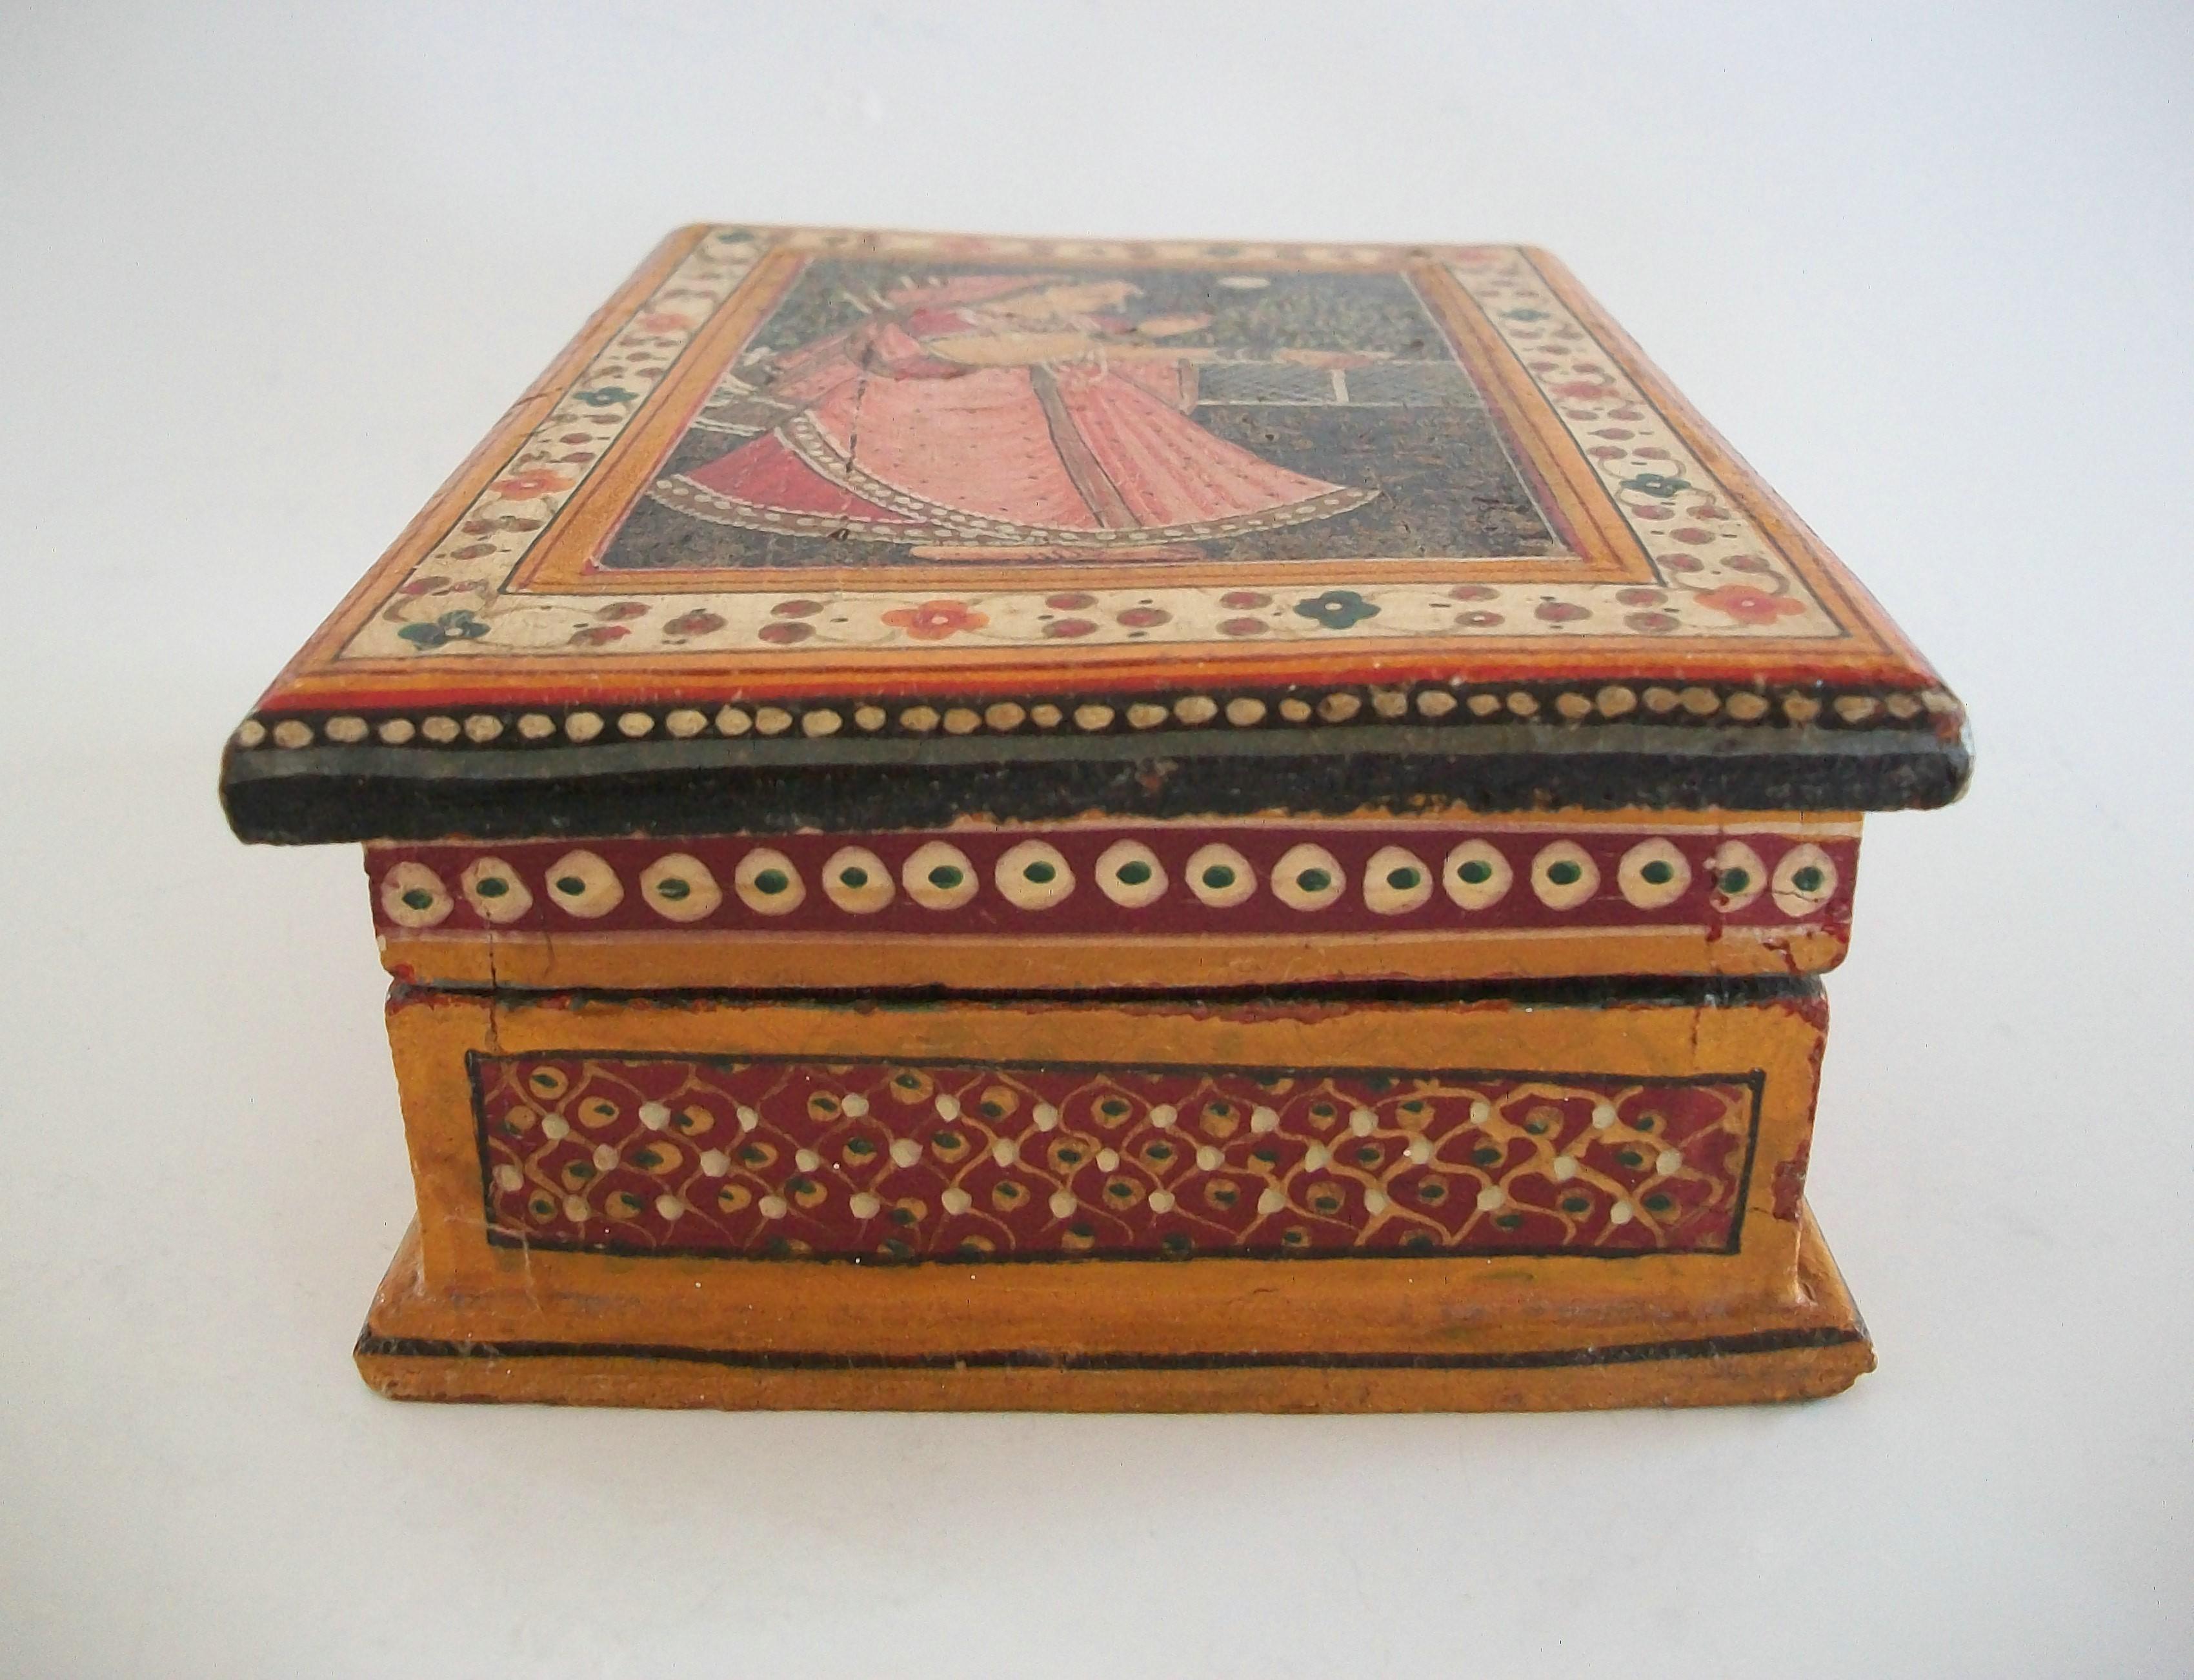 Softwood Vintage South Asian Folk Art Hand Painted Wooden Box - India - Mid 20th Century For Sale